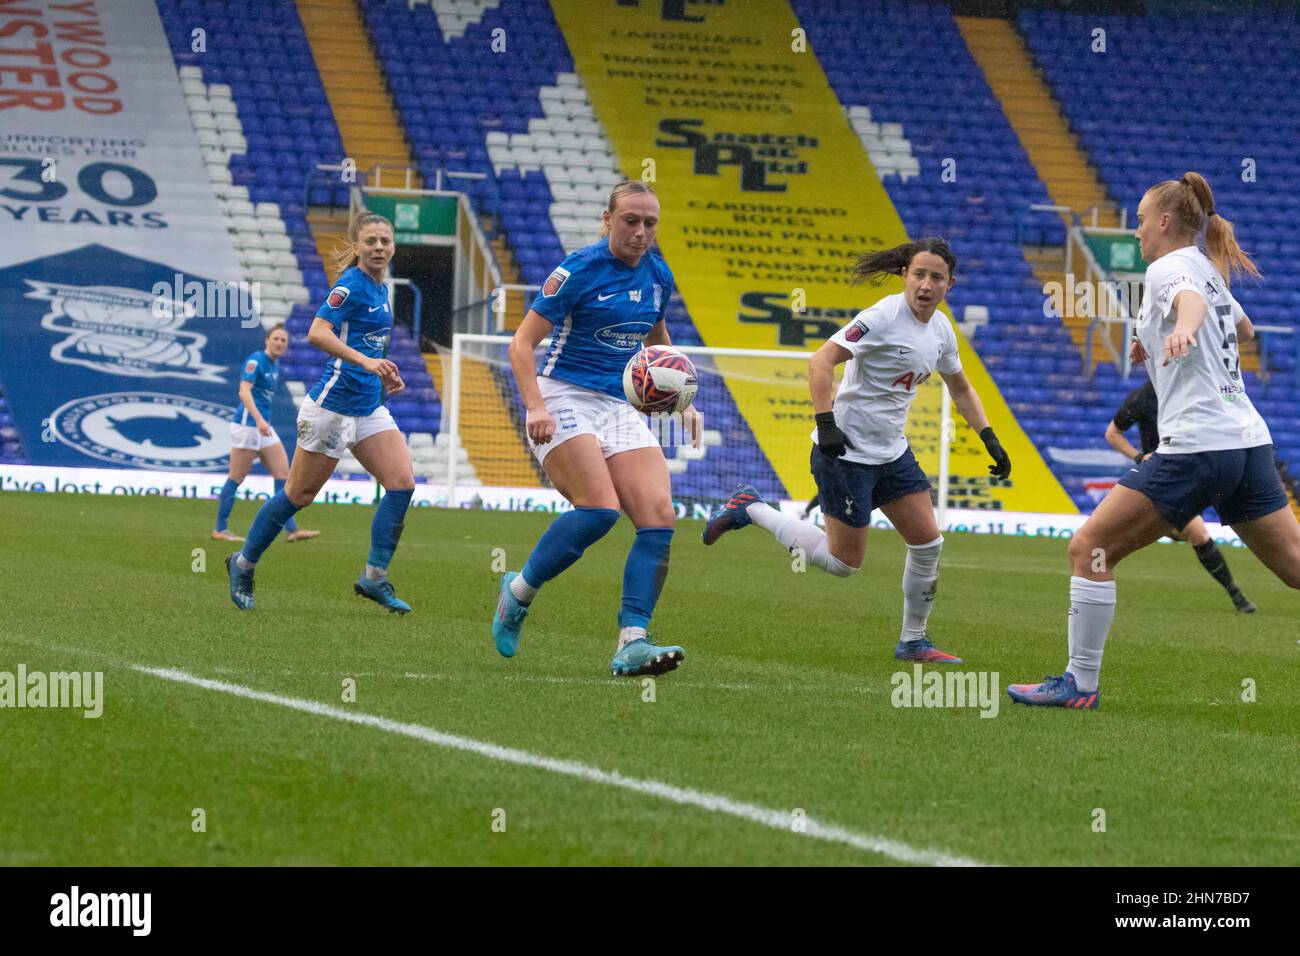 Libby Smith of Birmingham City flicking the ball past the Tottenham Hotspur defenders Stock Photo